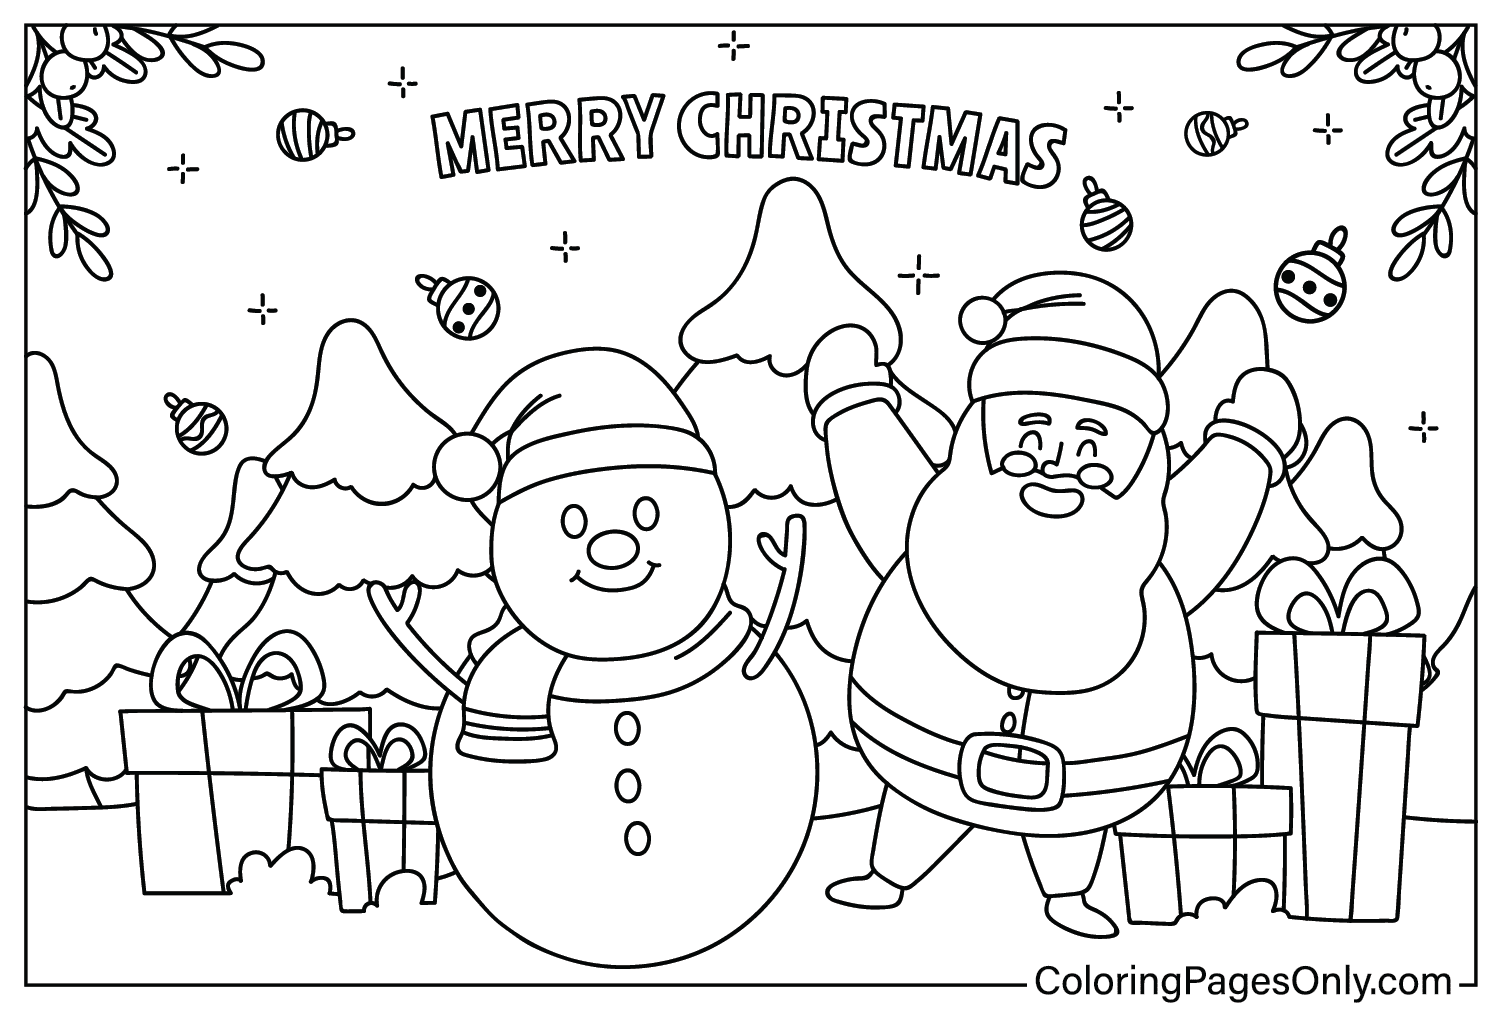 Christmas Wallpaper Coloring Page Free Printable from Christmas Wallpaper